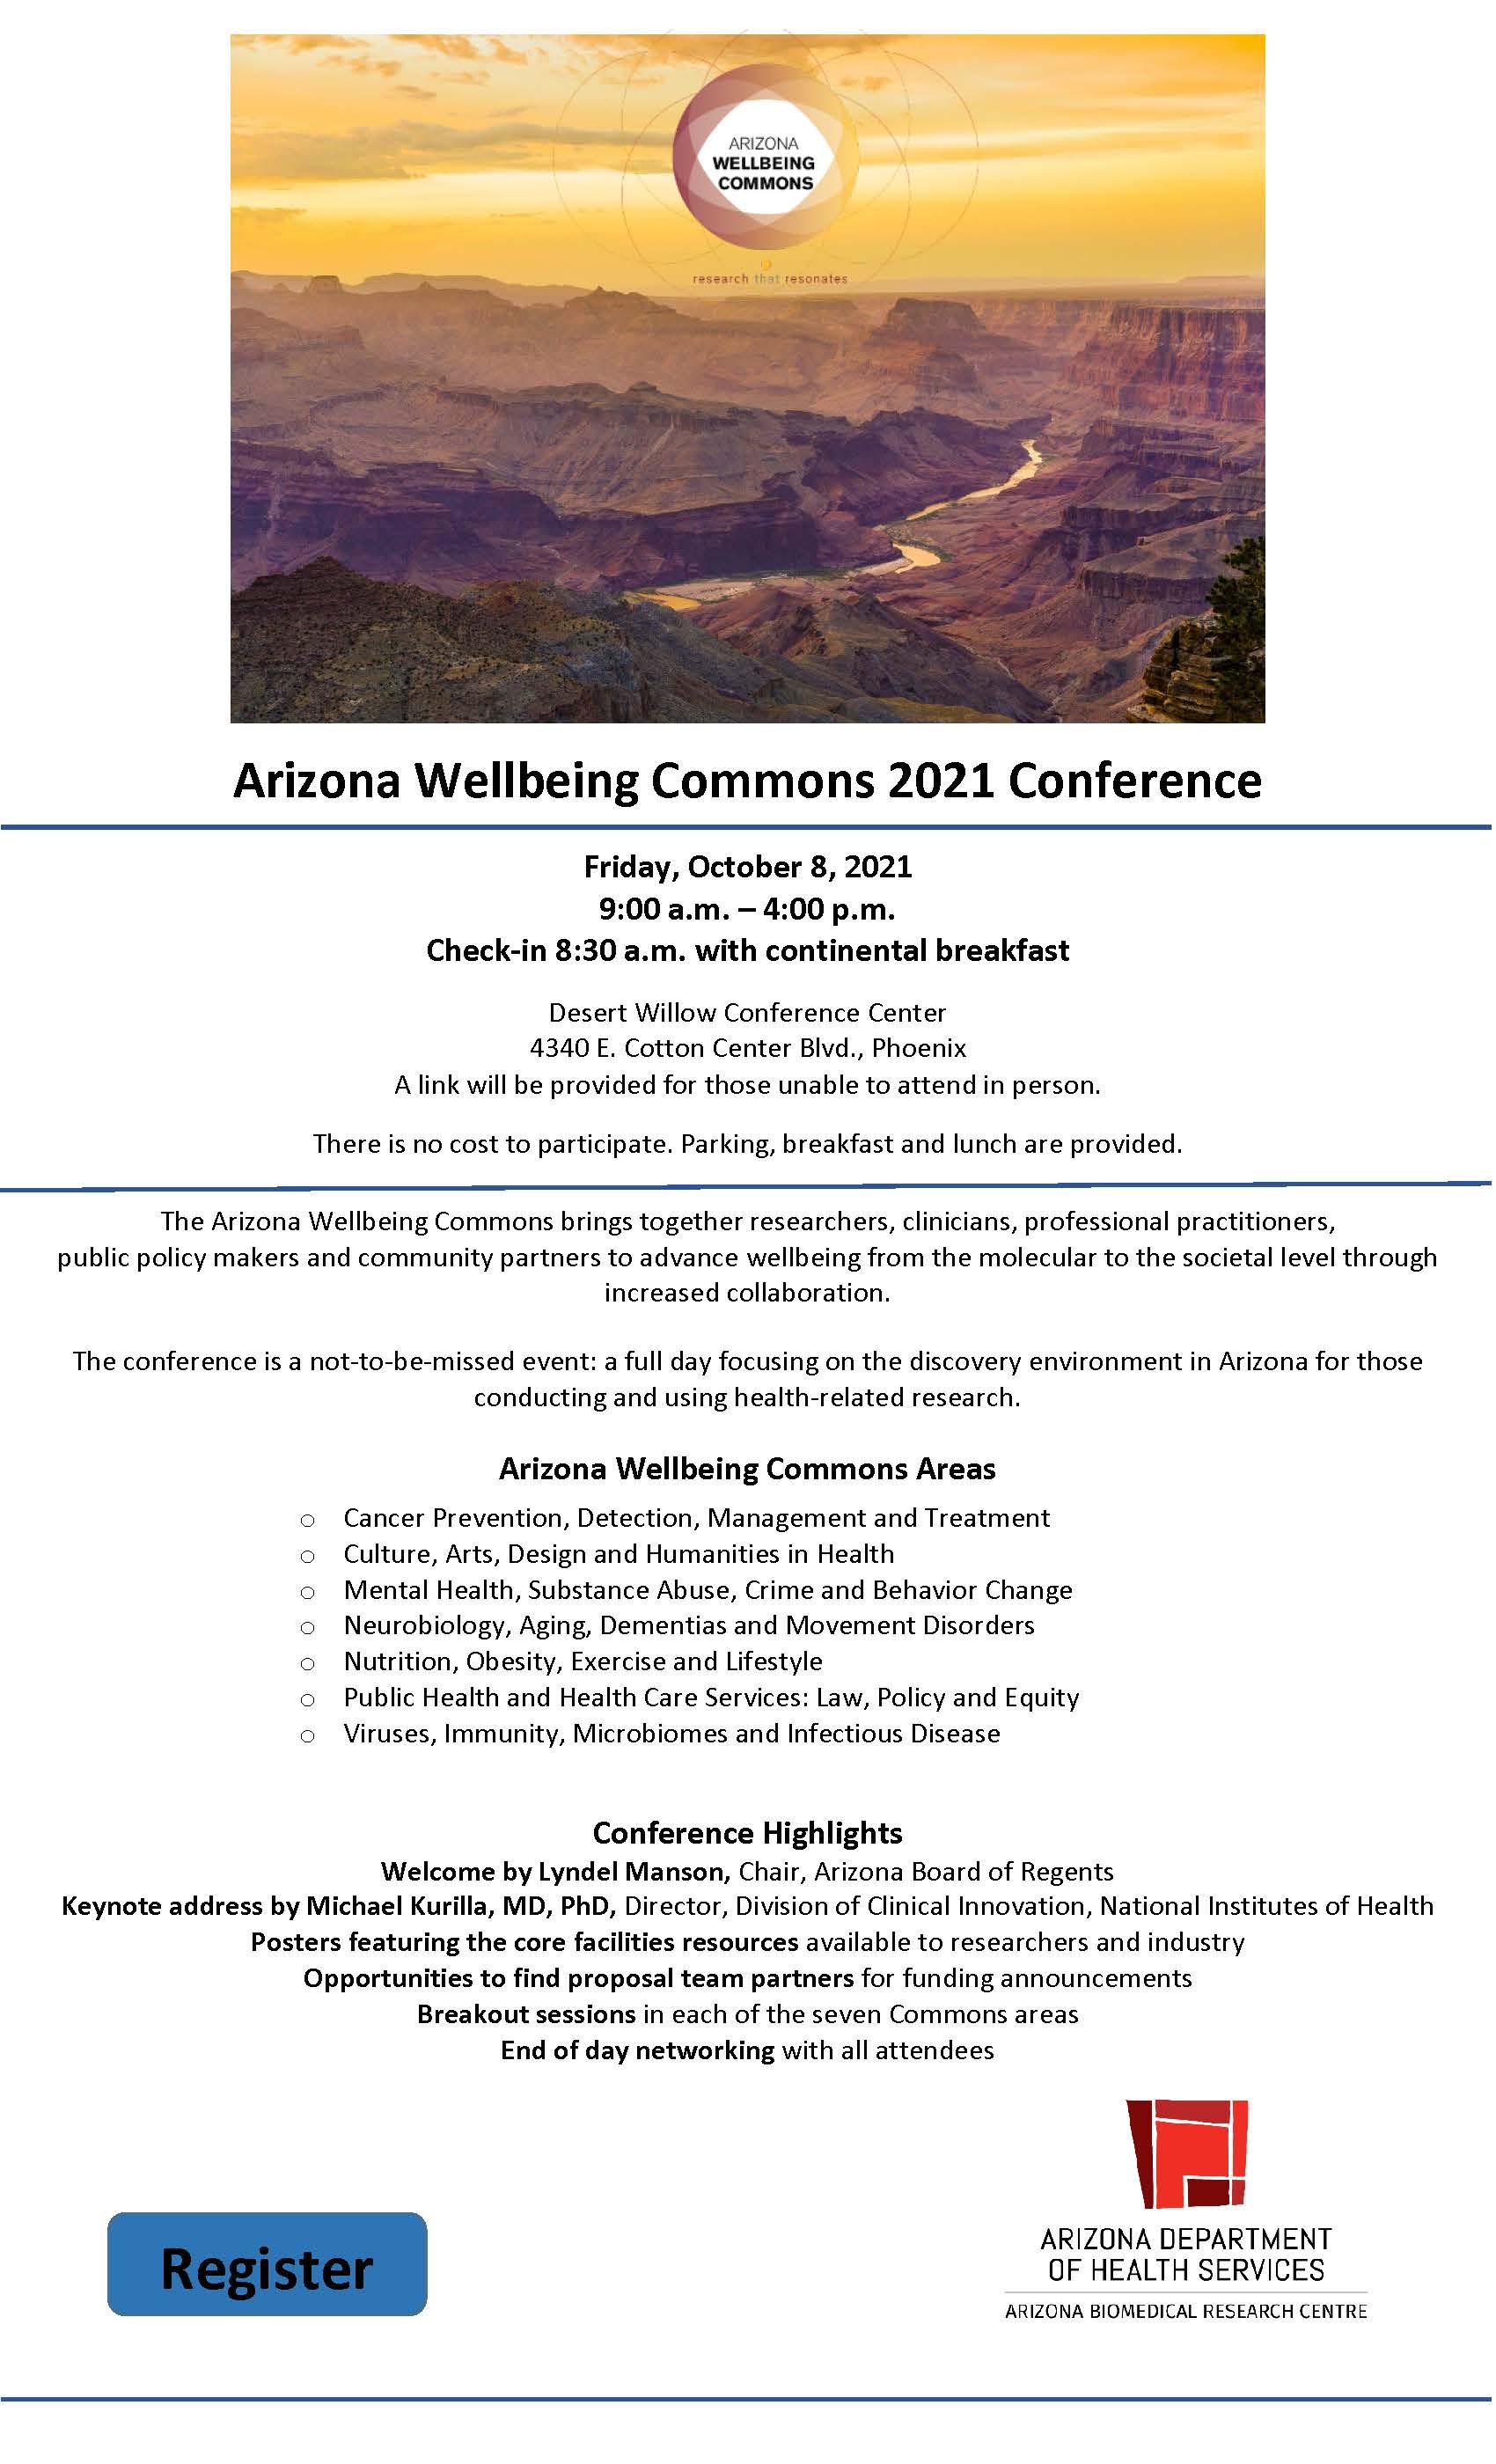 Arizona Wellbeing Commons 2021 Conference Flyer